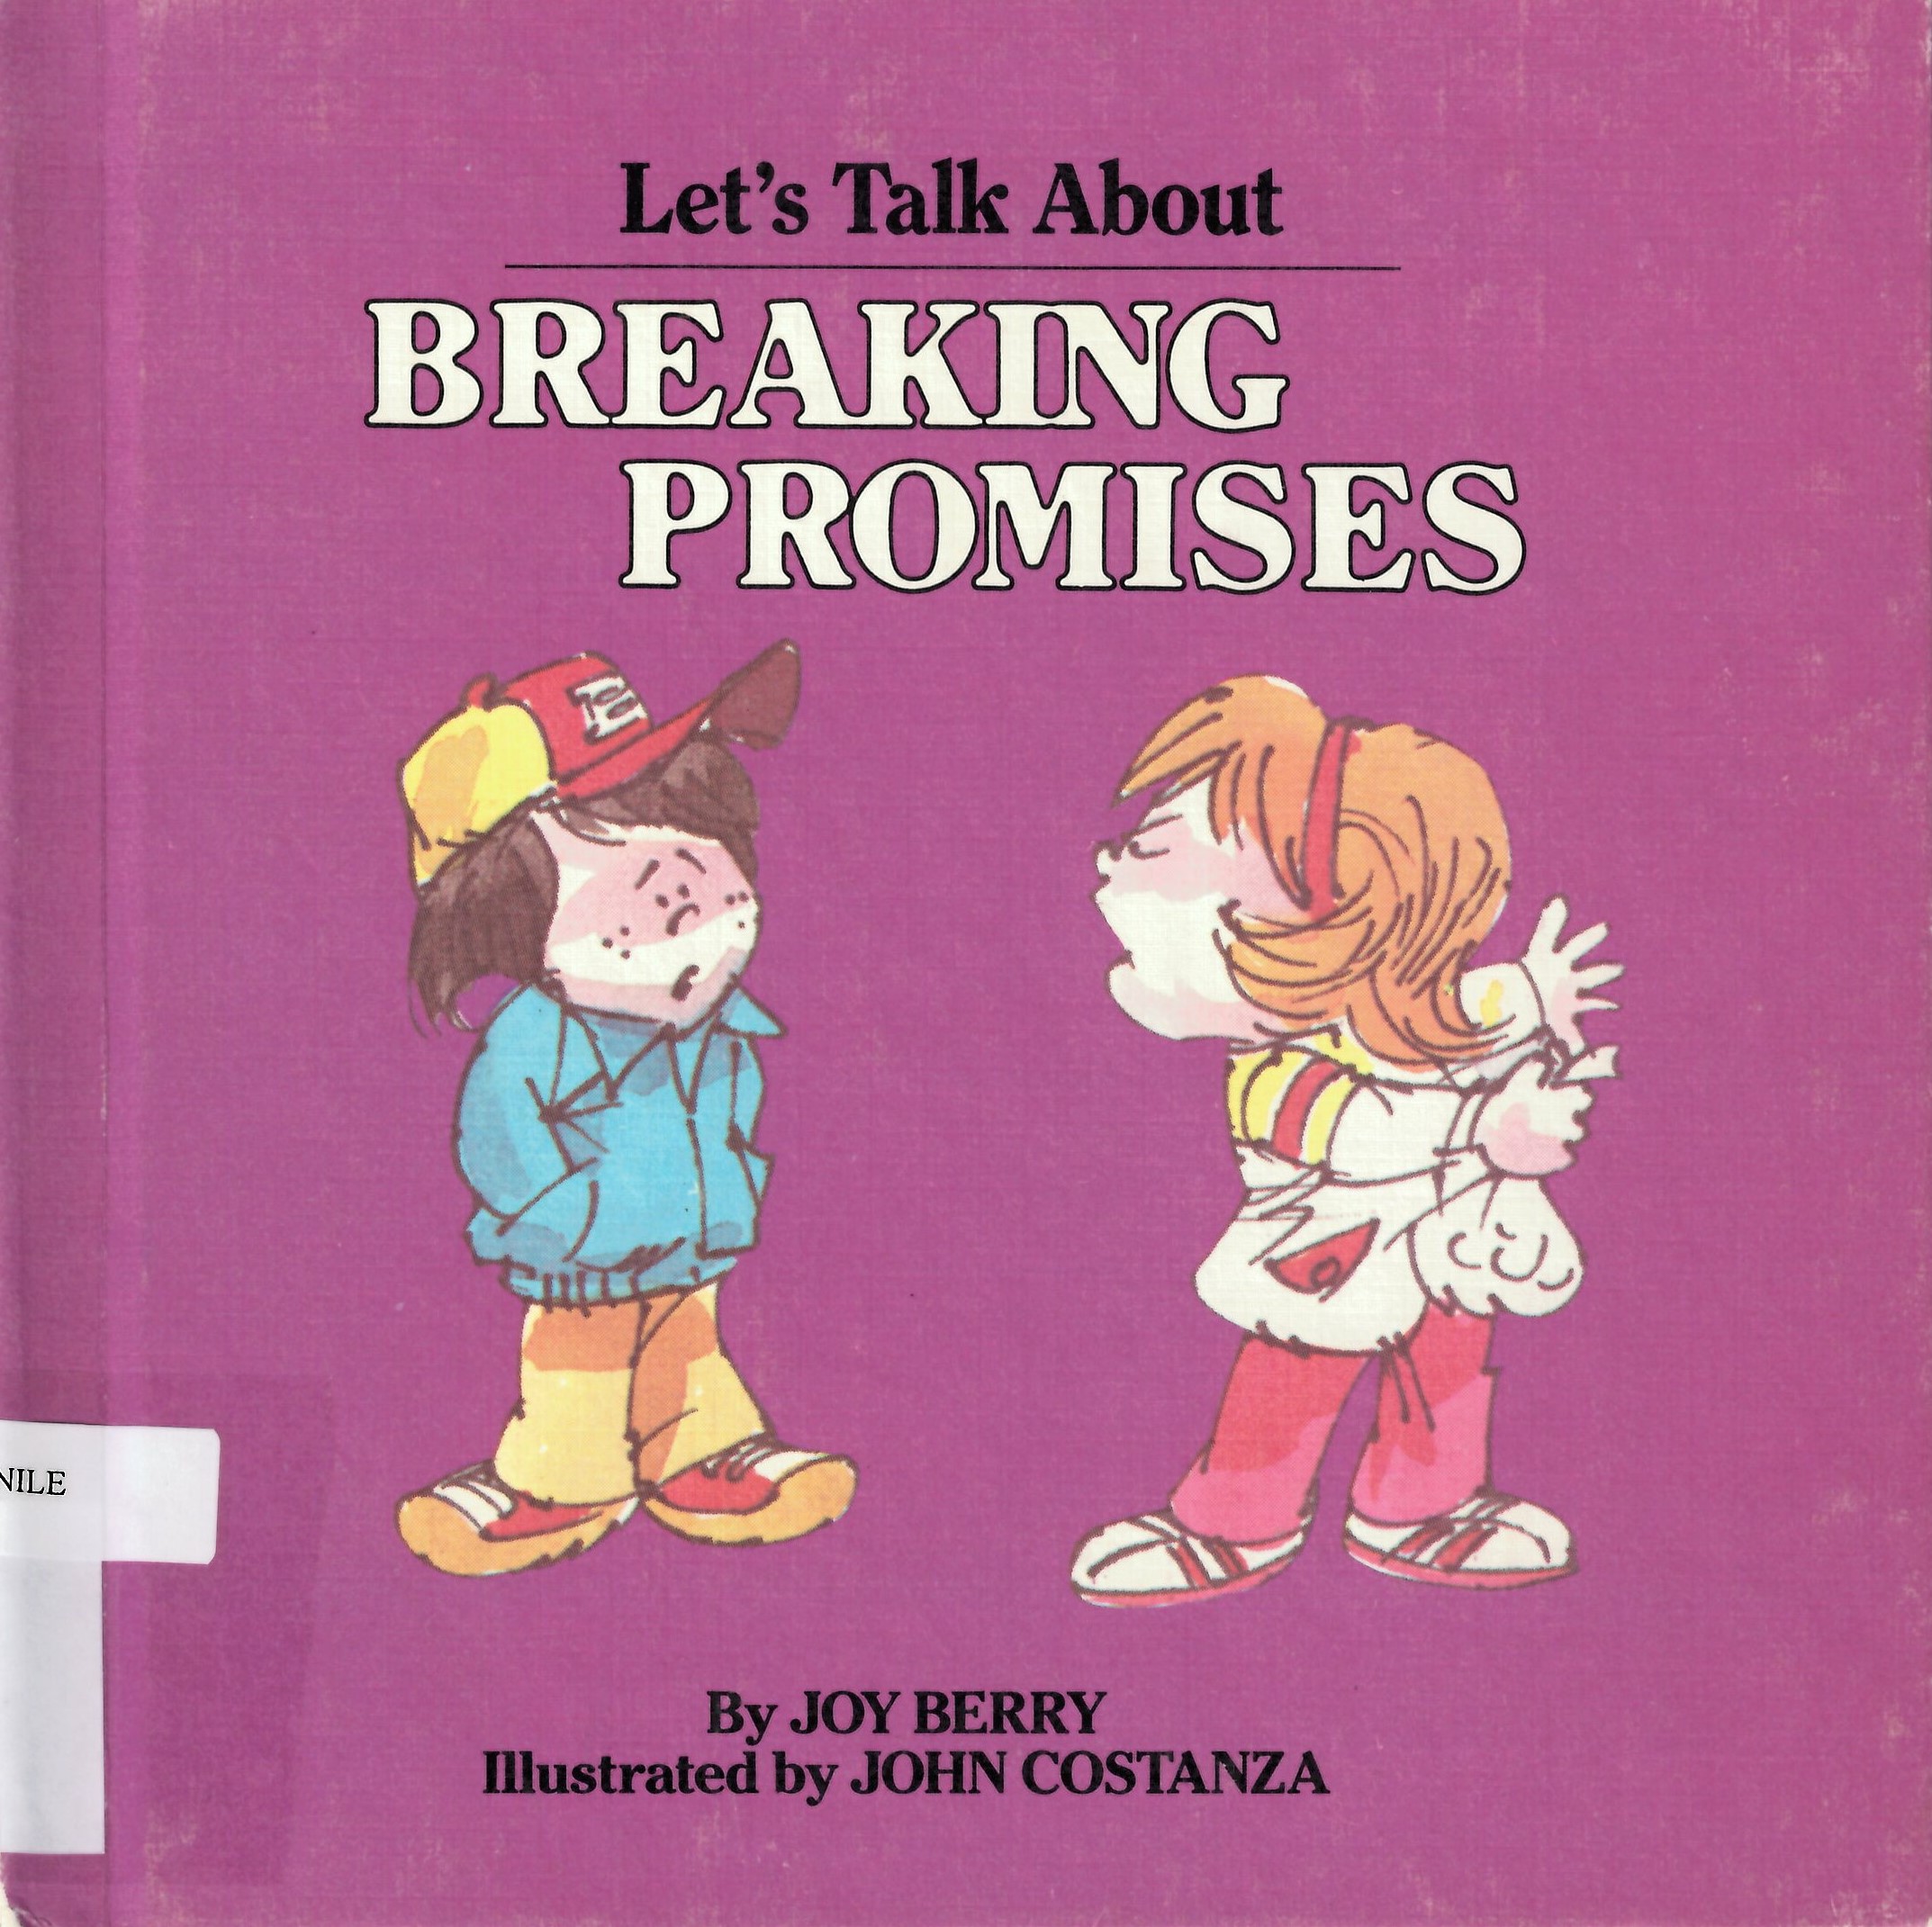 Let's talk about breaking promises